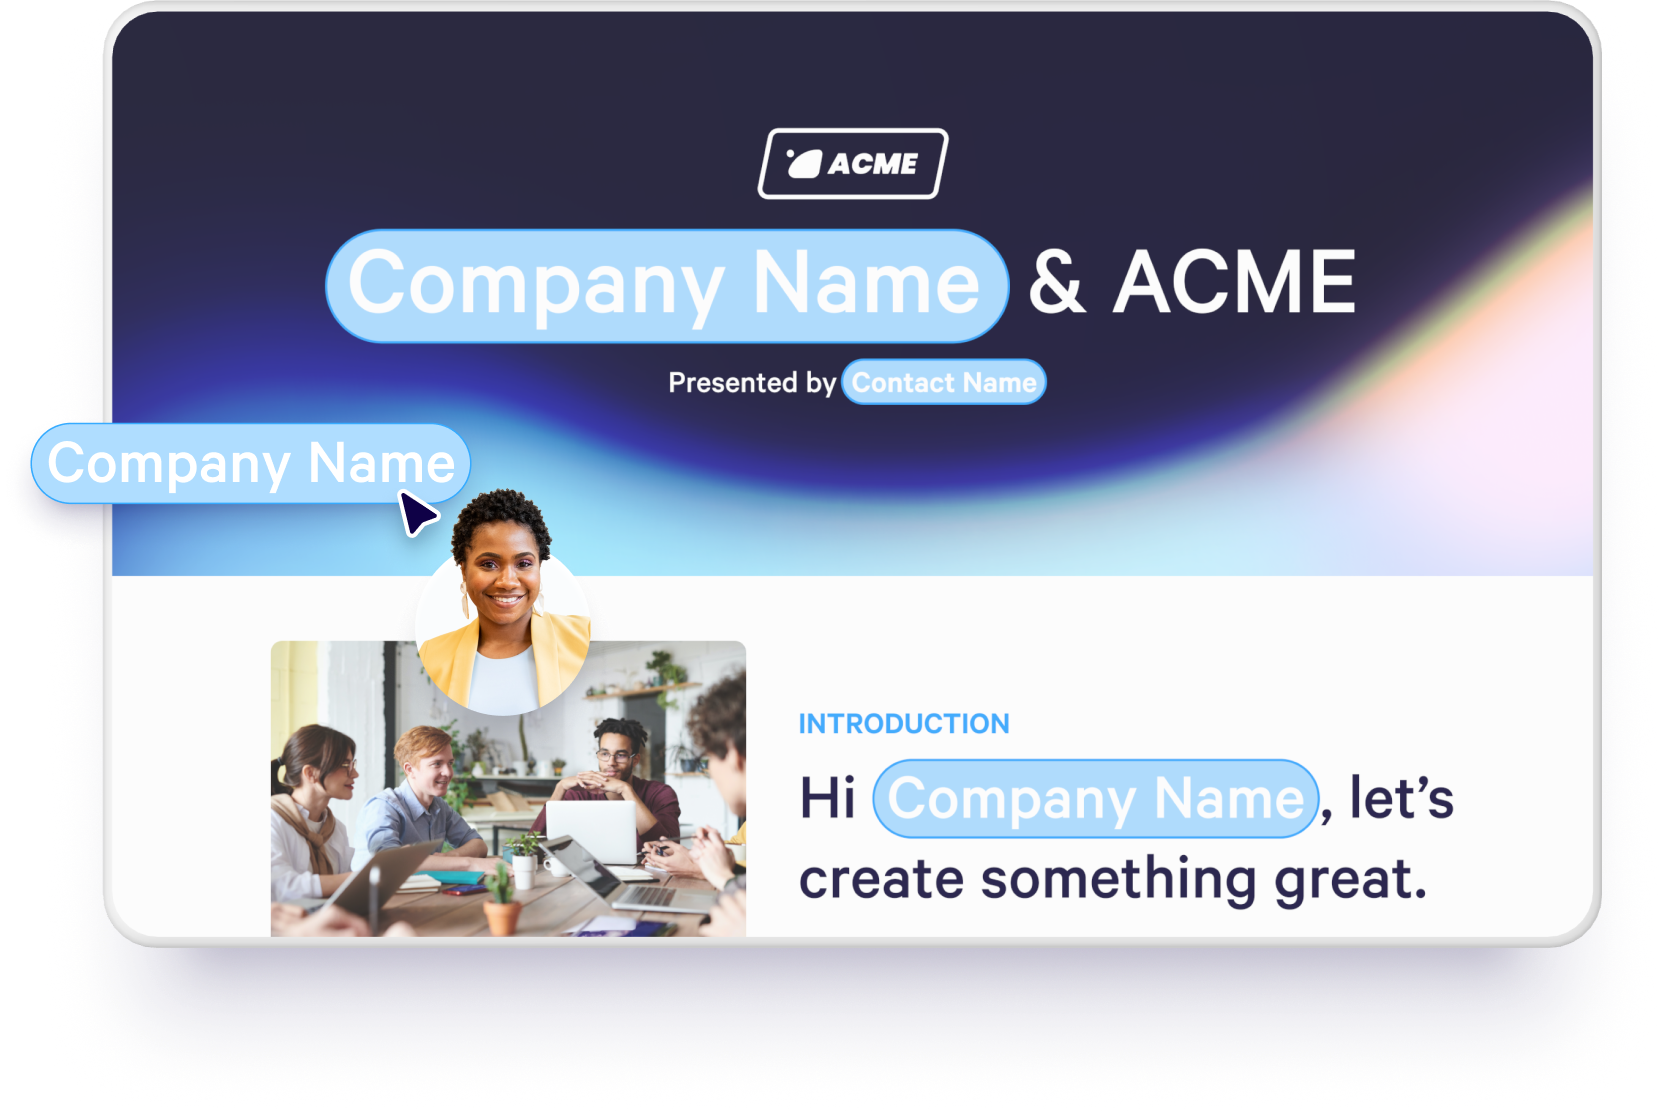 Connect to your CRM and automate all collateral creation